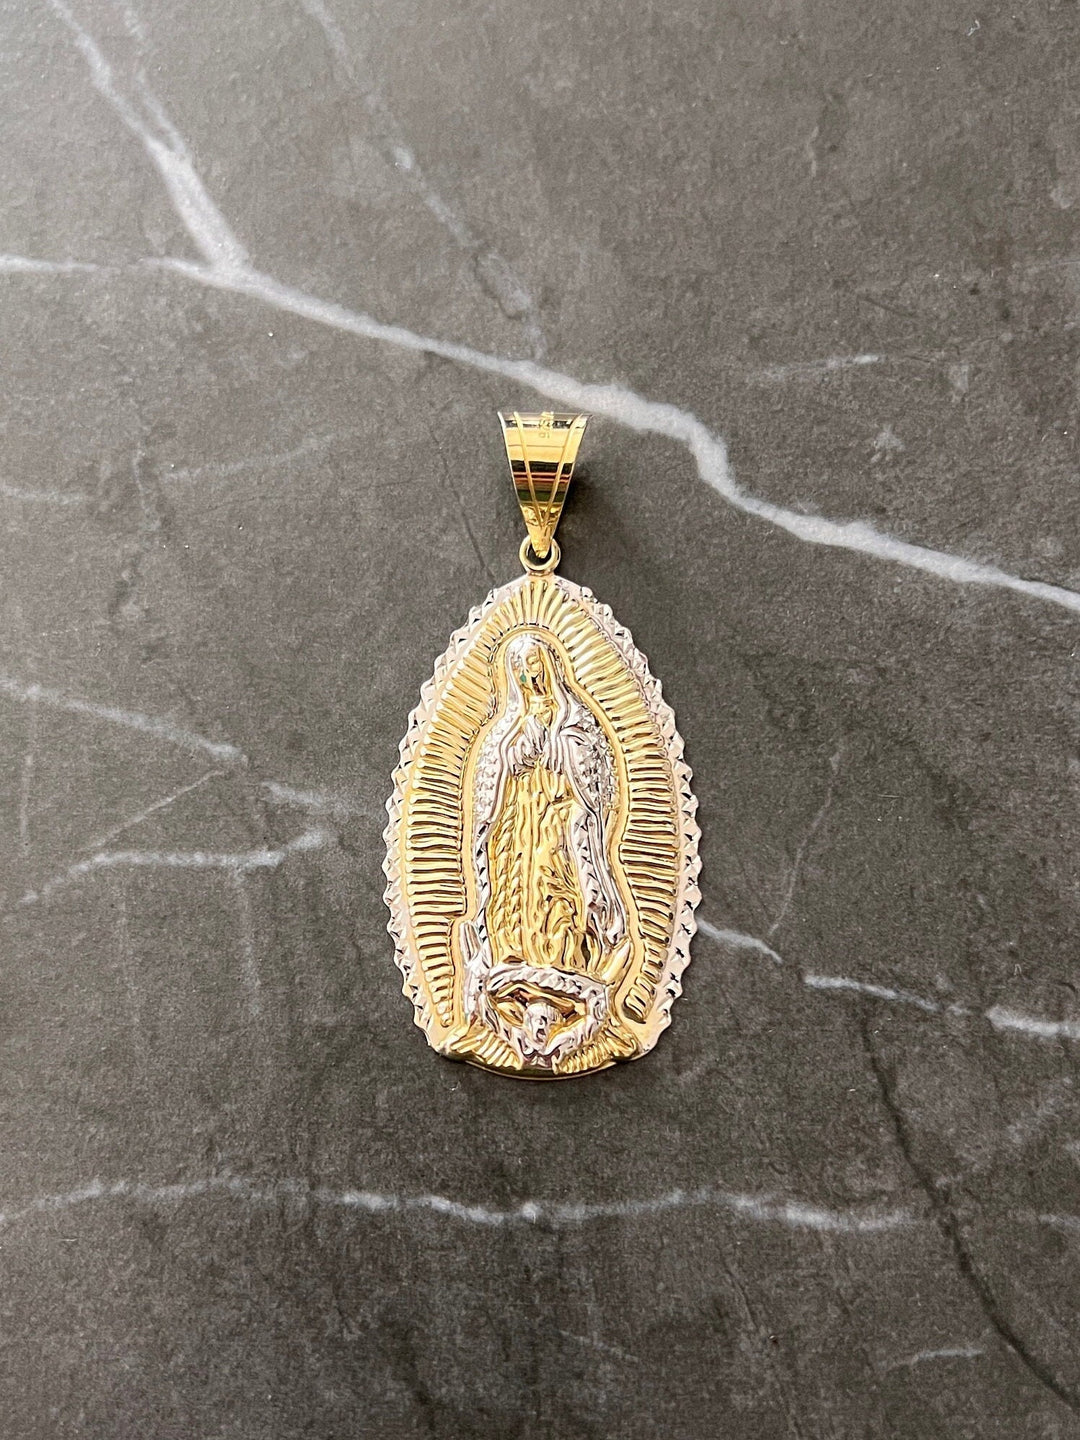 10K Yellow Gold .925 Sterling Silver Virgin Mother Mary Lady Guadalupe Charm/Pendant, Diamond Cut Real 10K Solid Mother Mary Jesus Medallion